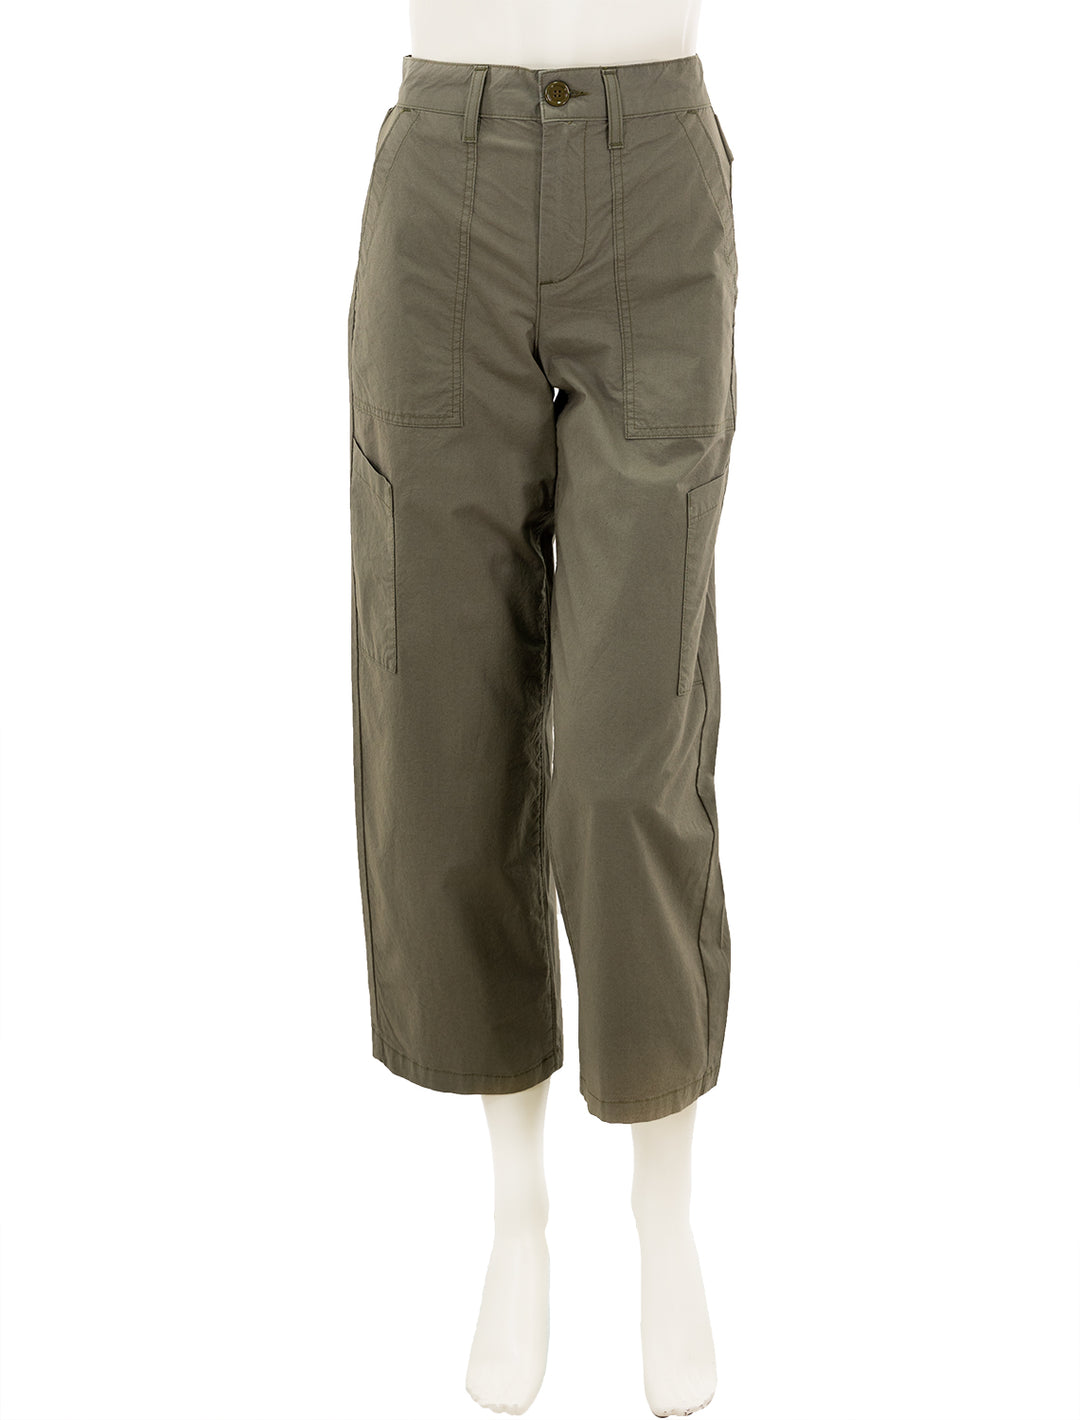 Front view of AGOLDE's daria utility pant in duffle.